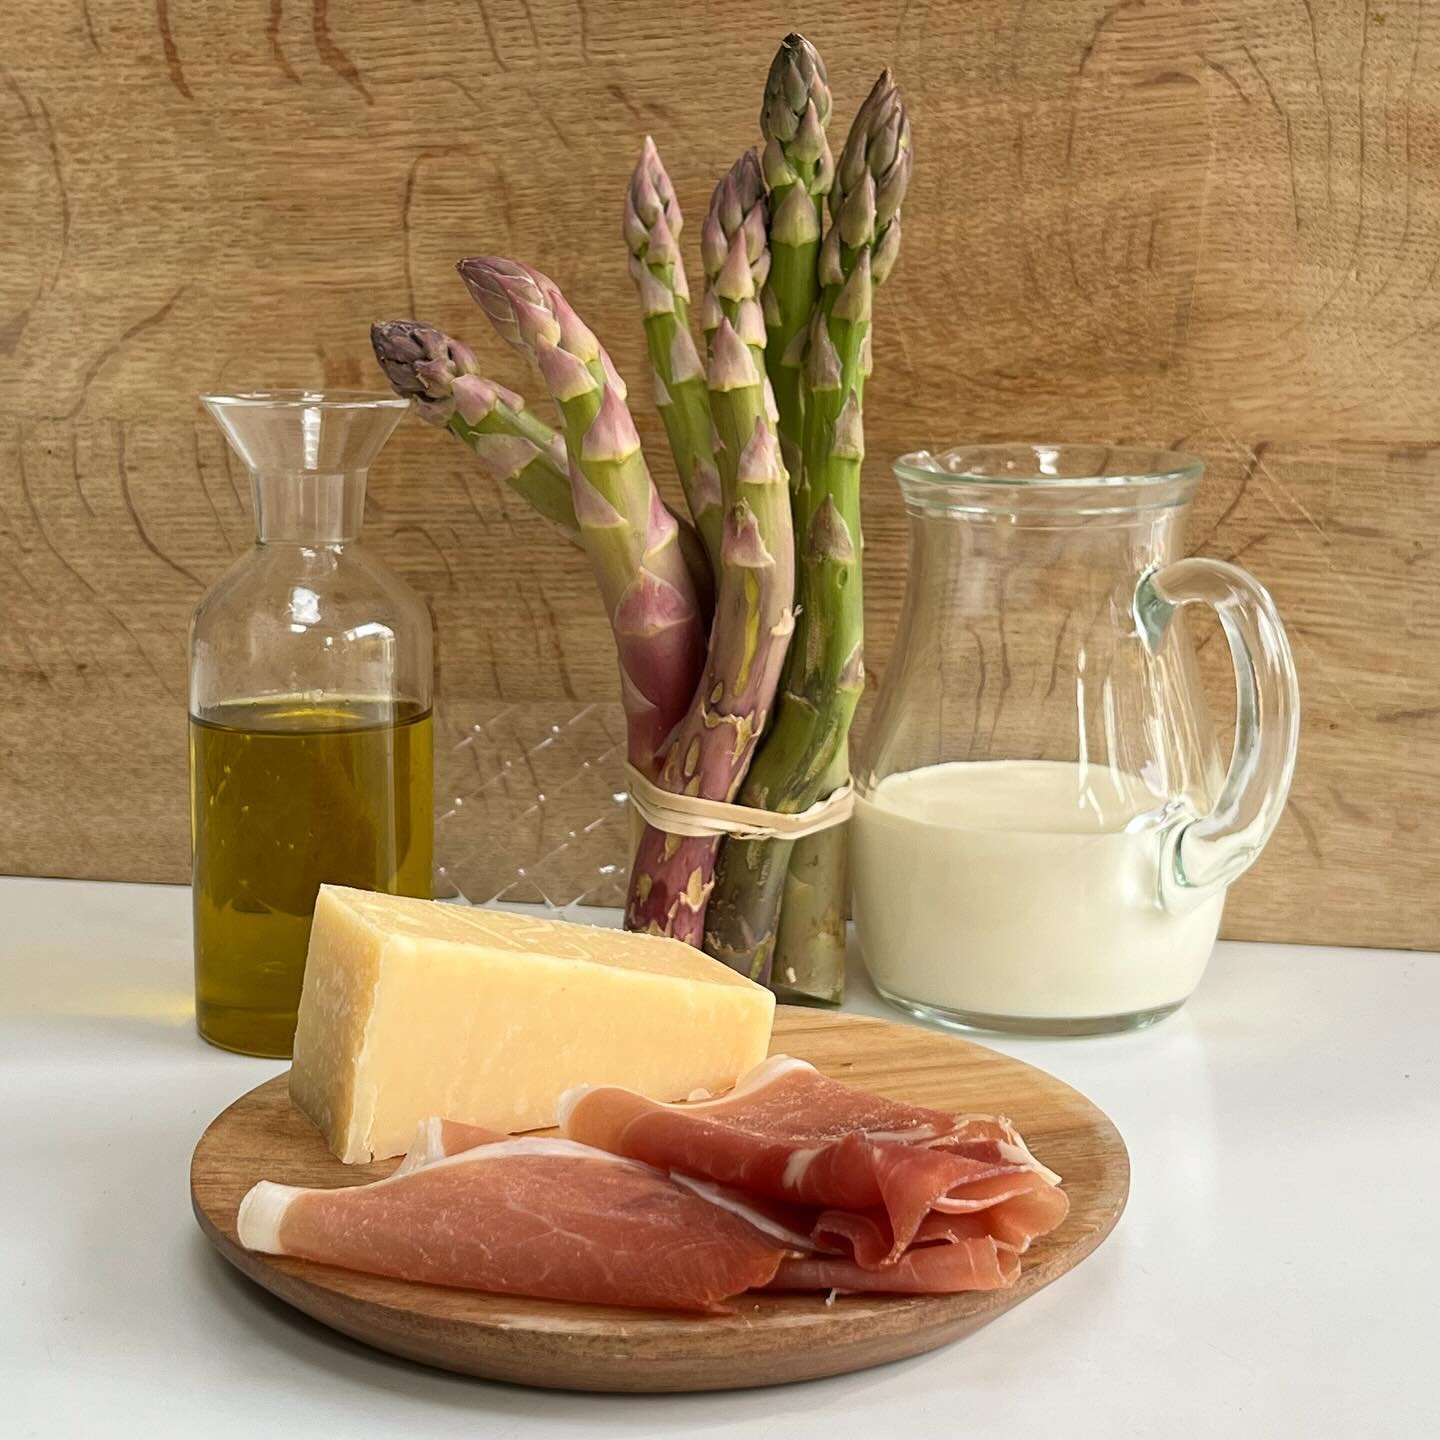 asparagus panna cotta with crunchy Parma ham and Parmesan shavings

If you are looking for a wow factor, and love asparagus, this is it! 
The creamy and delicate asparagus panna cotta contrasts with the crunchy, salty Parma ham and the nutty Parmesan